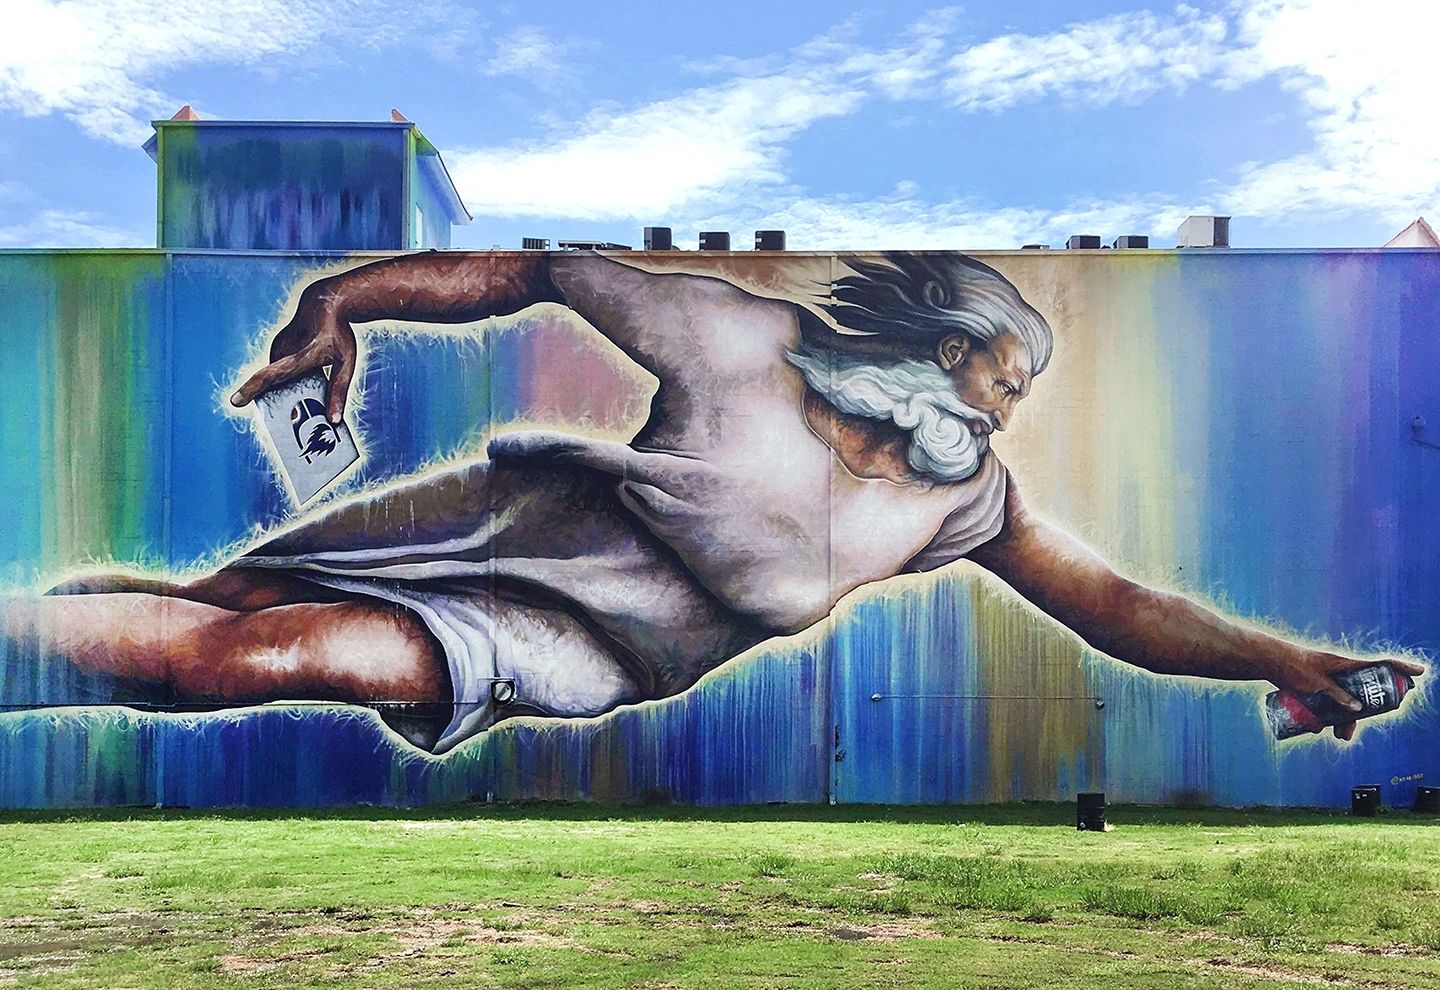 The Most Comprehensive Guide To Houston's Colorful Walls – Carrie For Houston Wall Art (View 19 of 20)